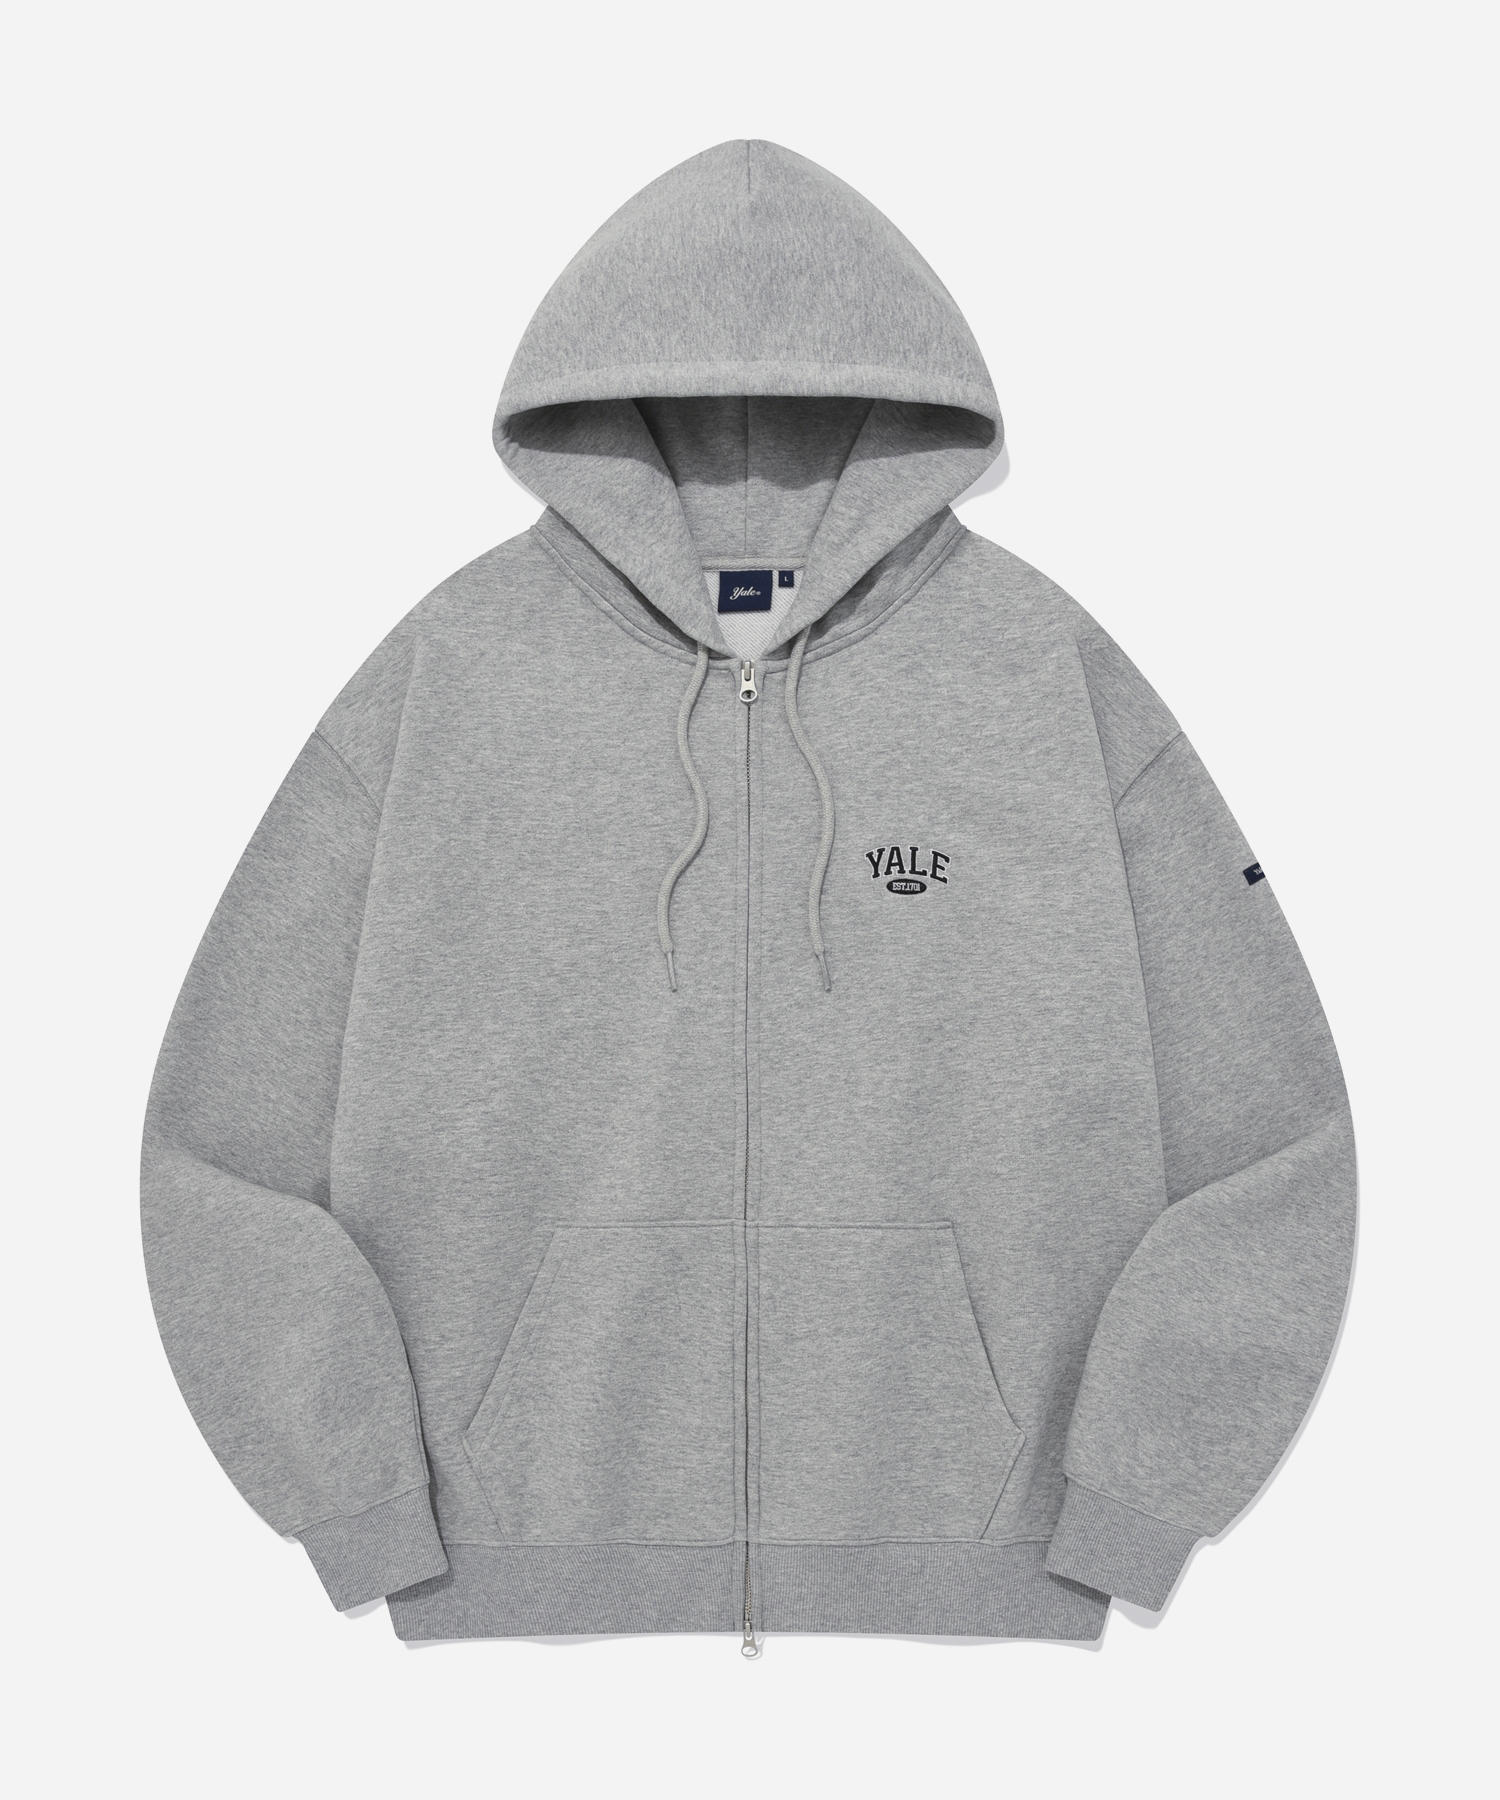 (24SS) SMALL 2 TONE ARCH HOODIE ZIP UP GRAY